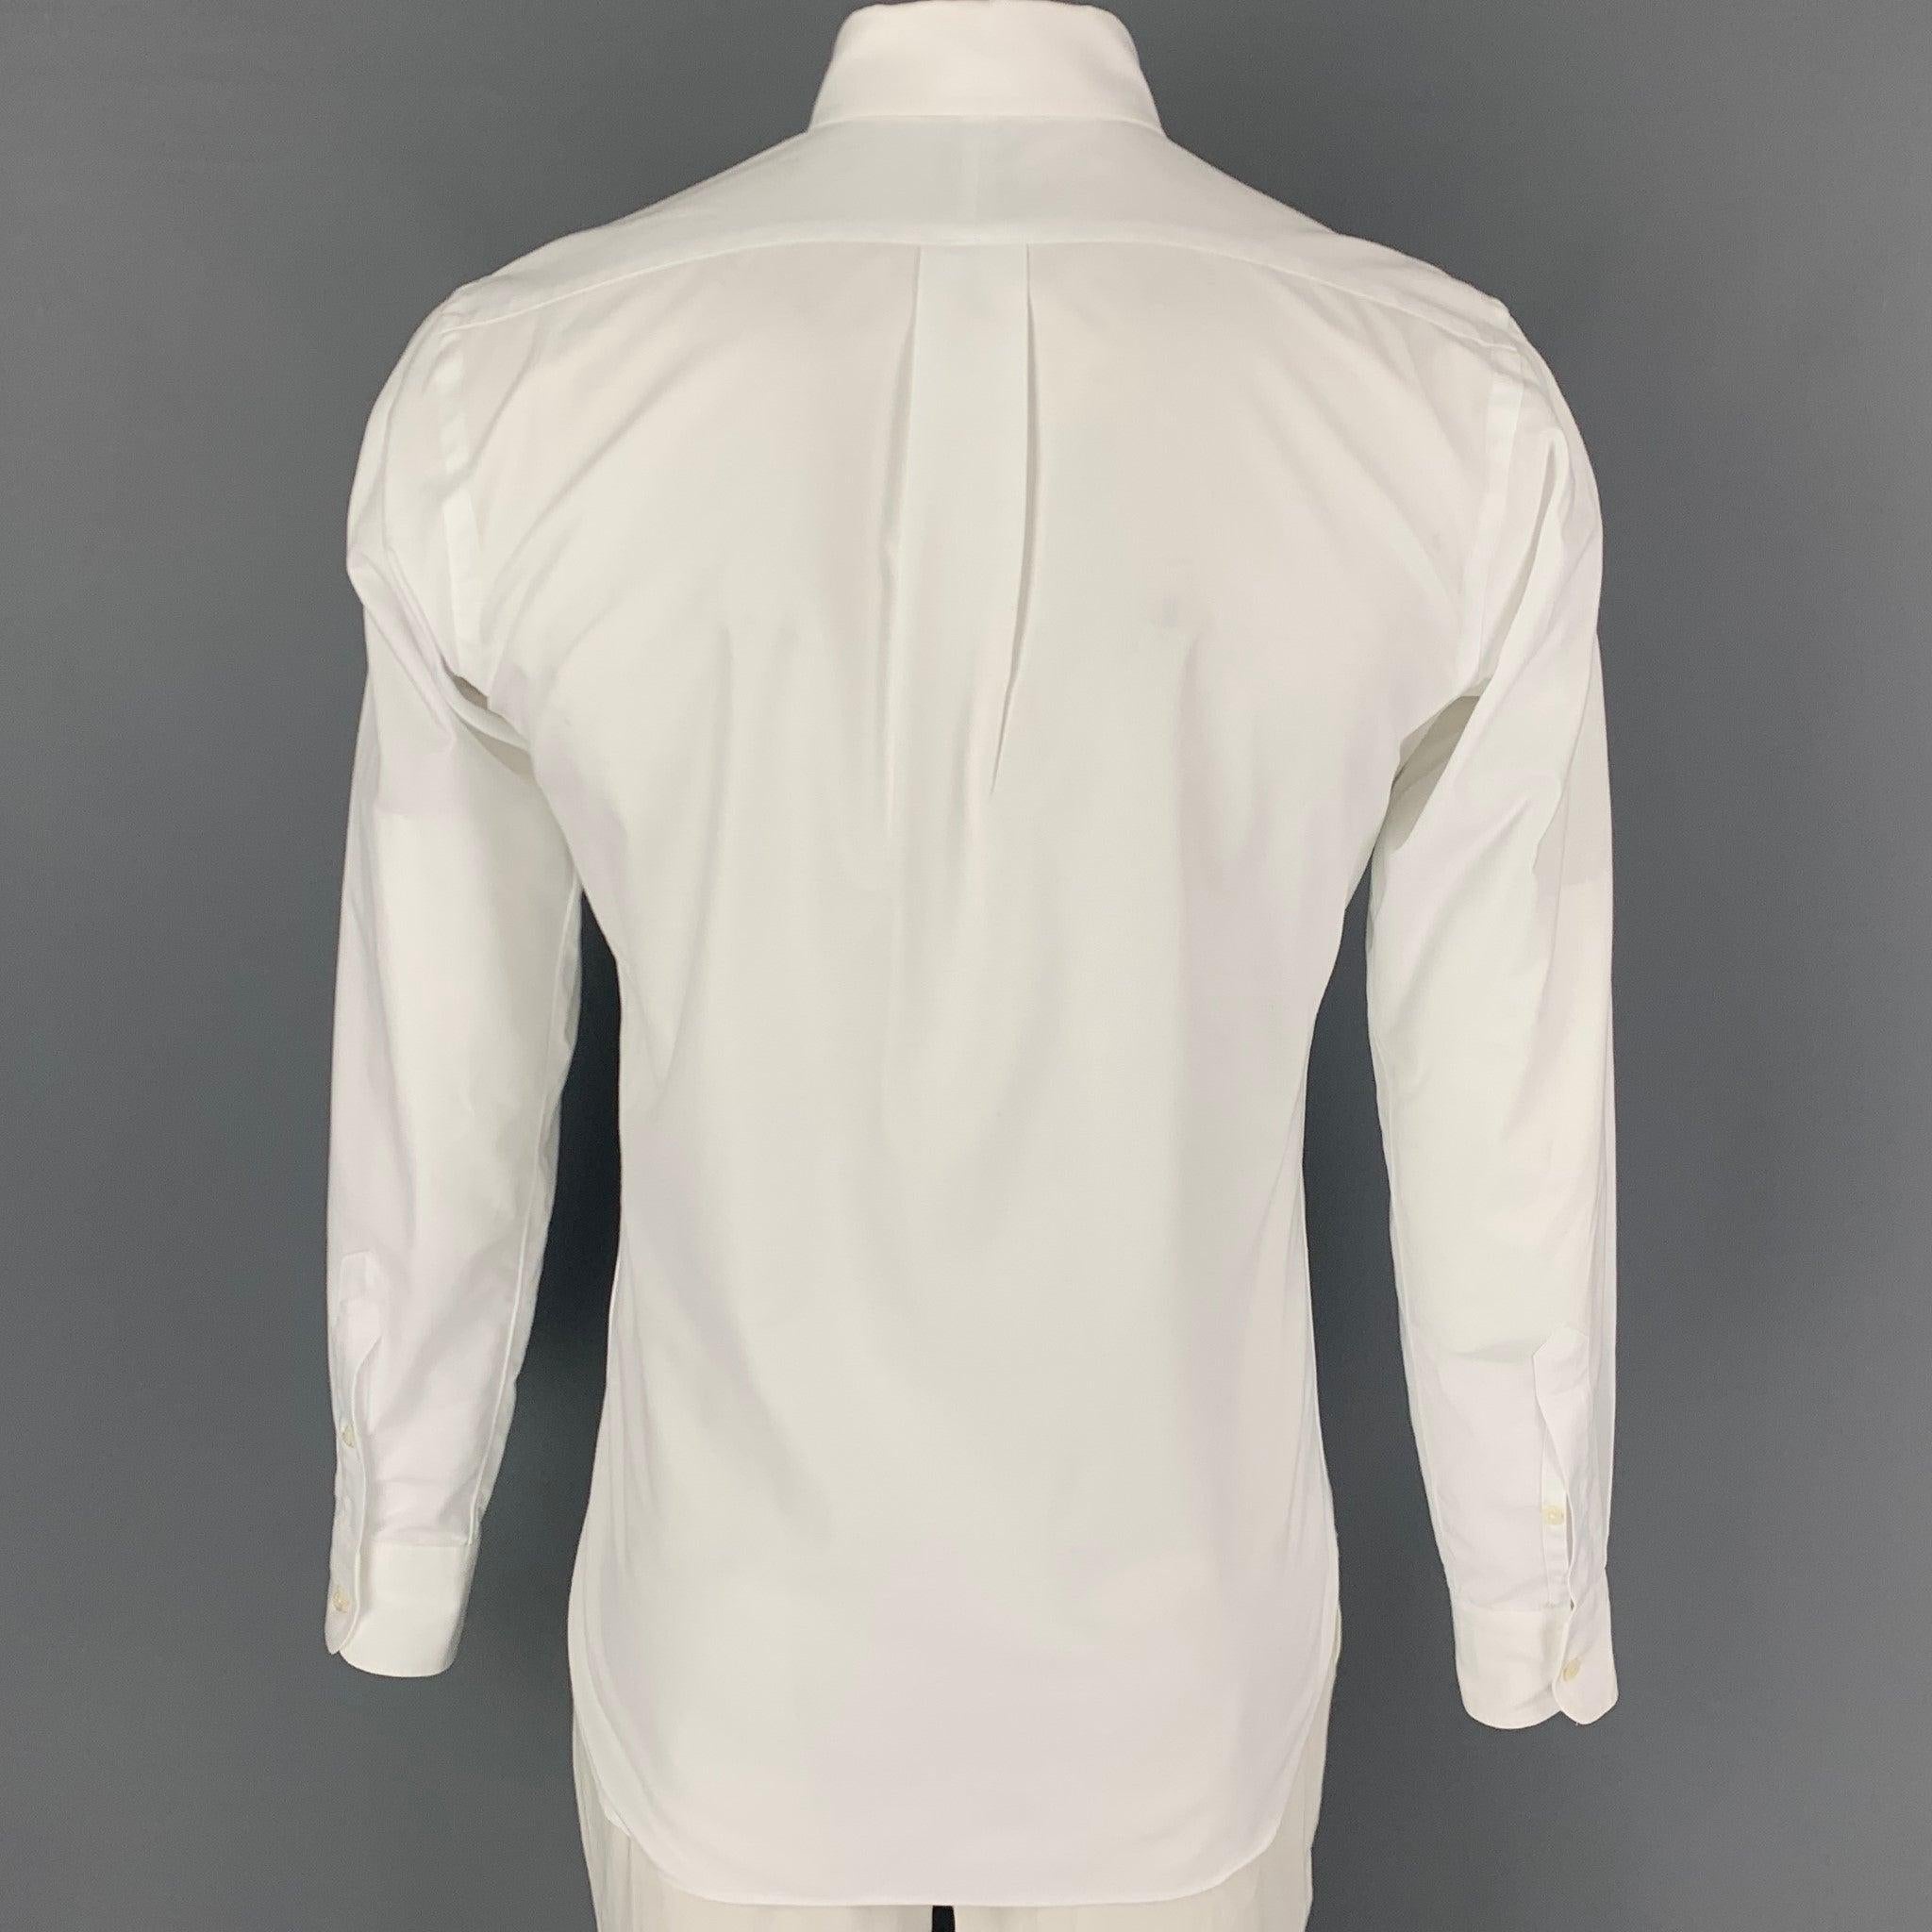 HAMILTON Size L White Oxford Long Sleeve Shirt In Good Condition For Sale In San Francisco, CA